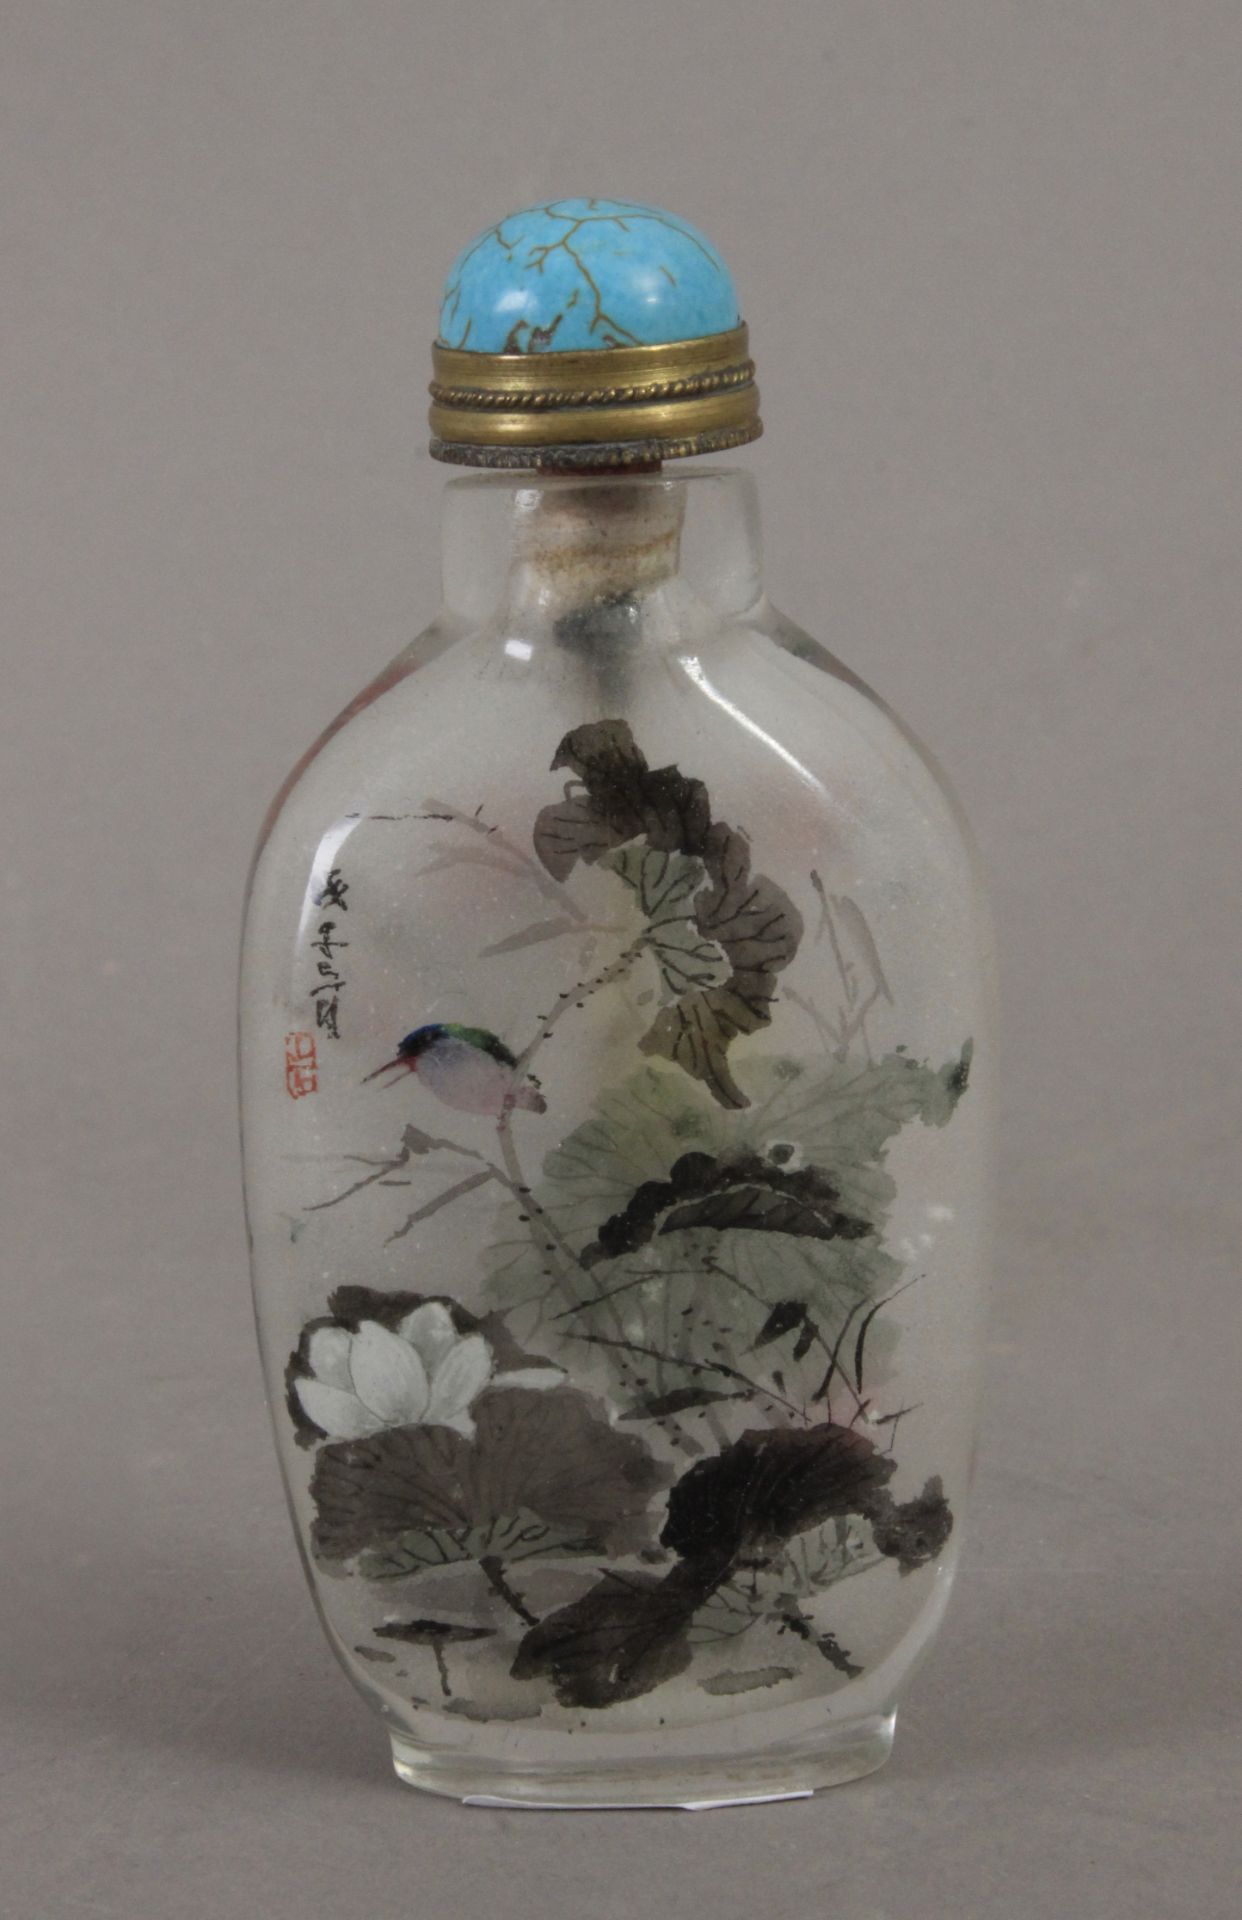 A first third of 20th century snuff bottle in Peking glass